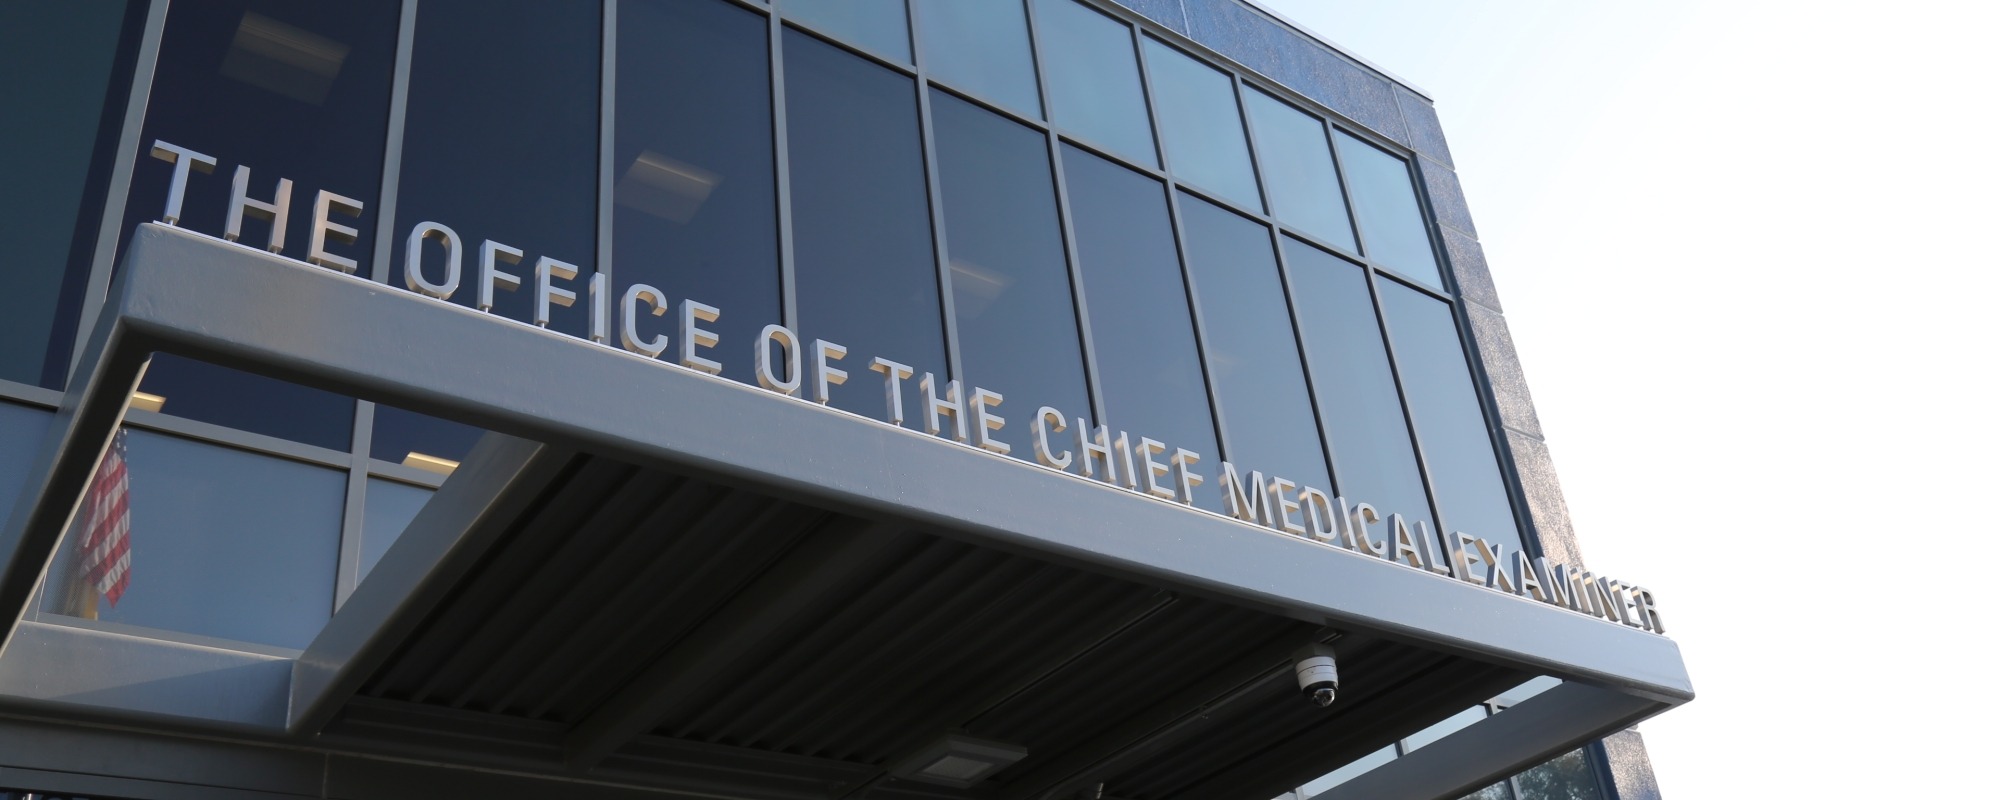 Office of the Chief Medical Examiner